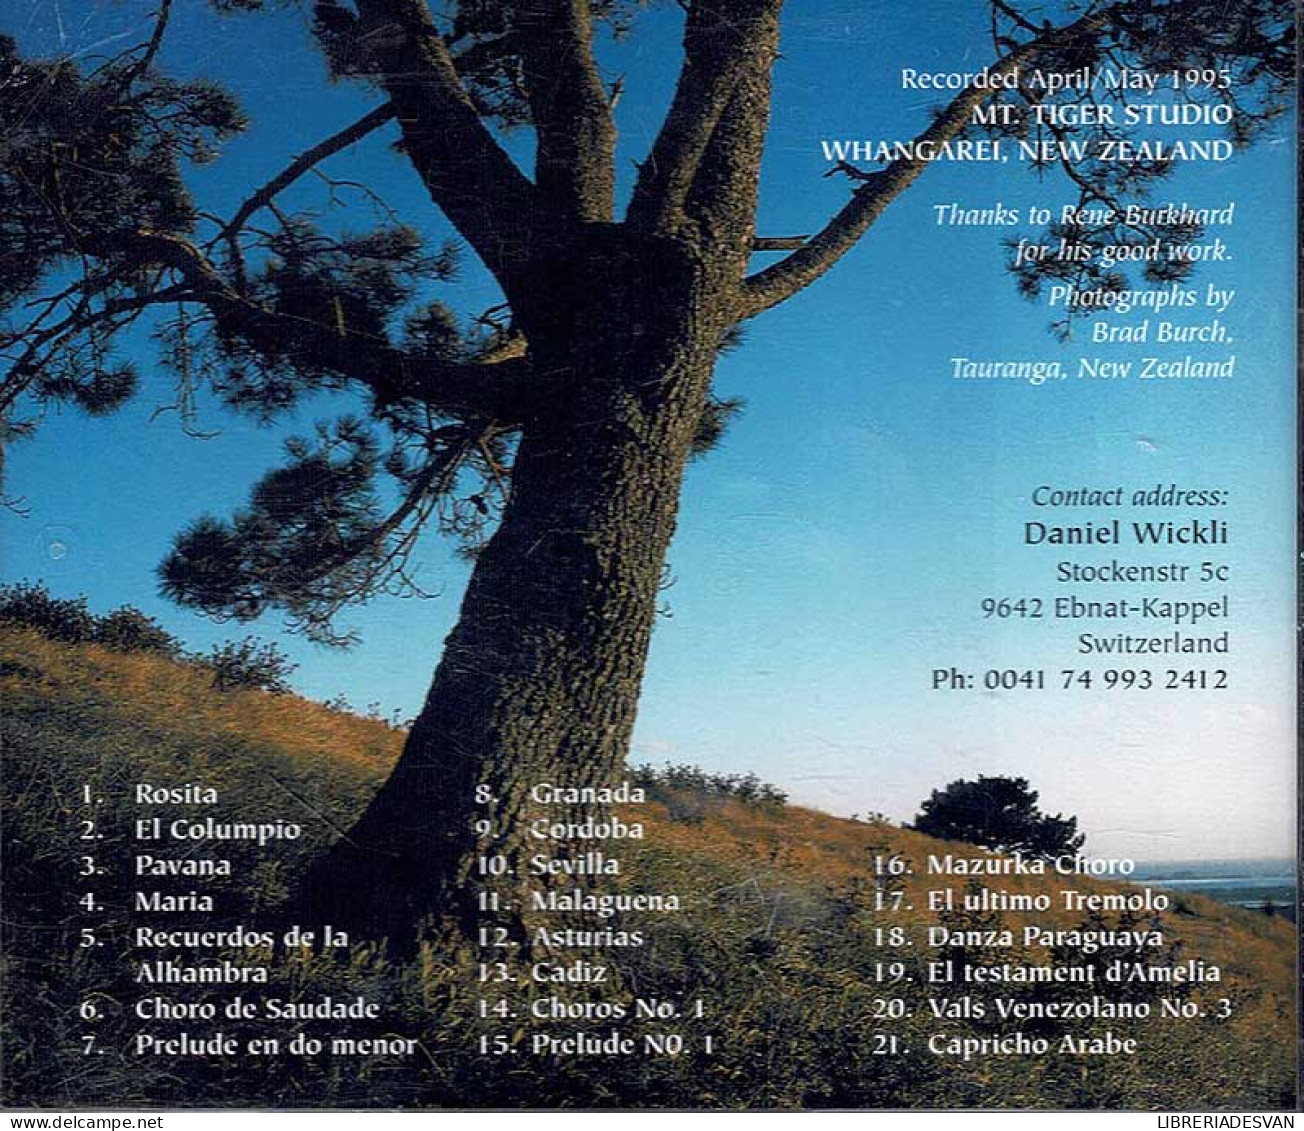 Daniel Wickli - The Timeless Beauty Of The Classical Guitar Volume Two . CD - Classical